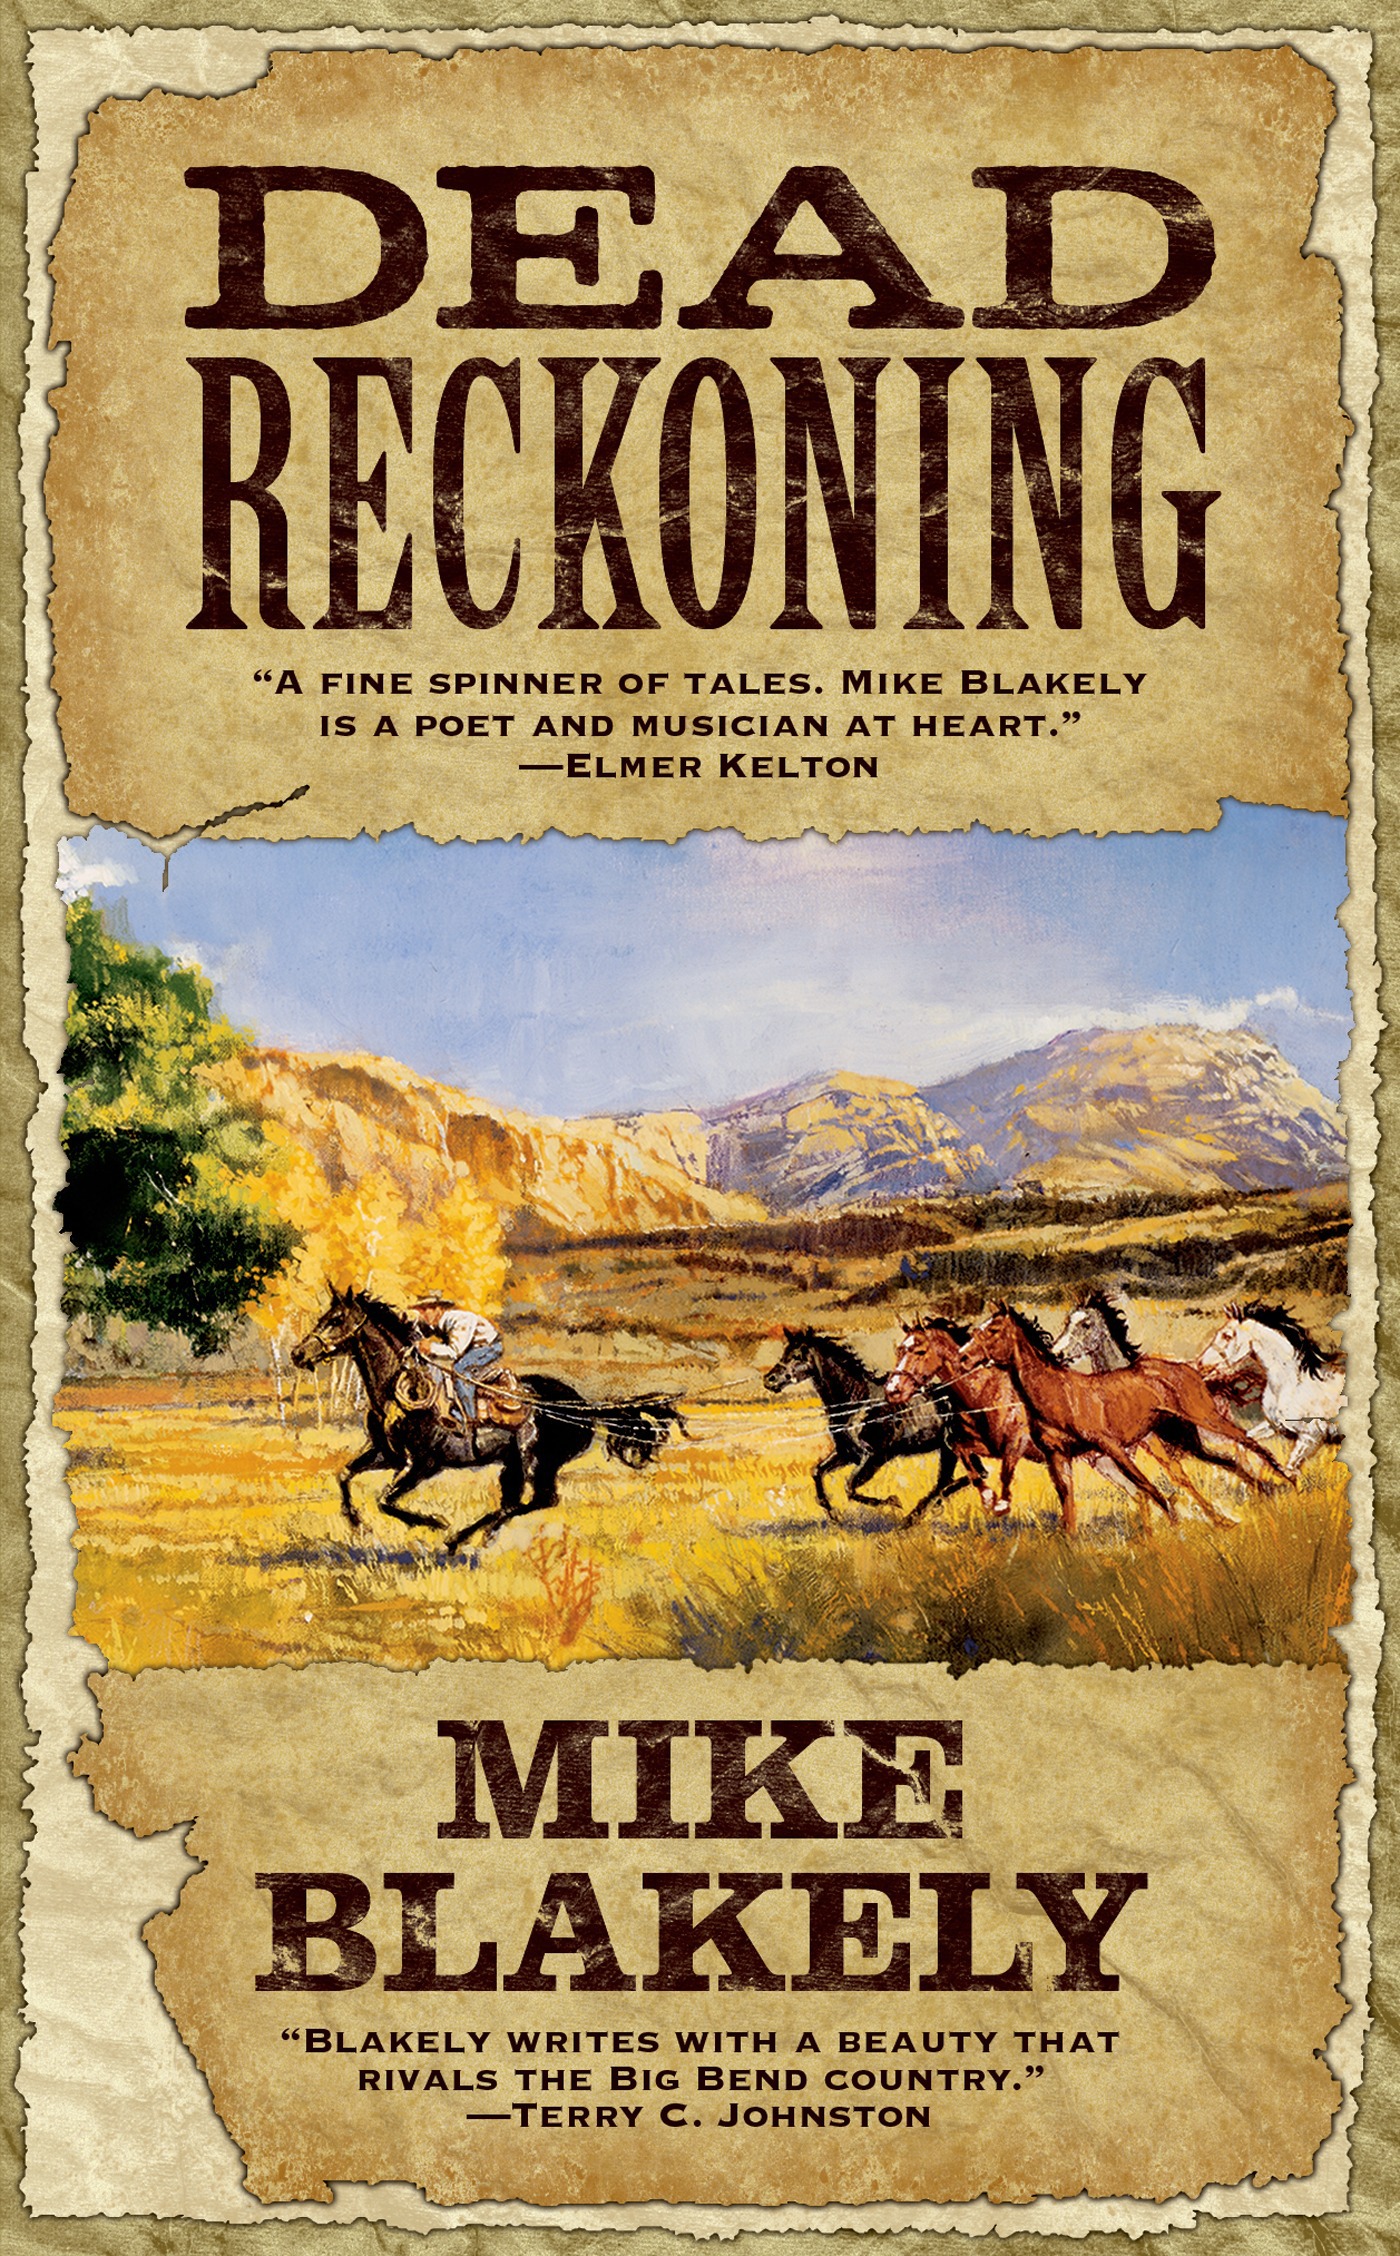 Dead Reckoning by Mike Blakely